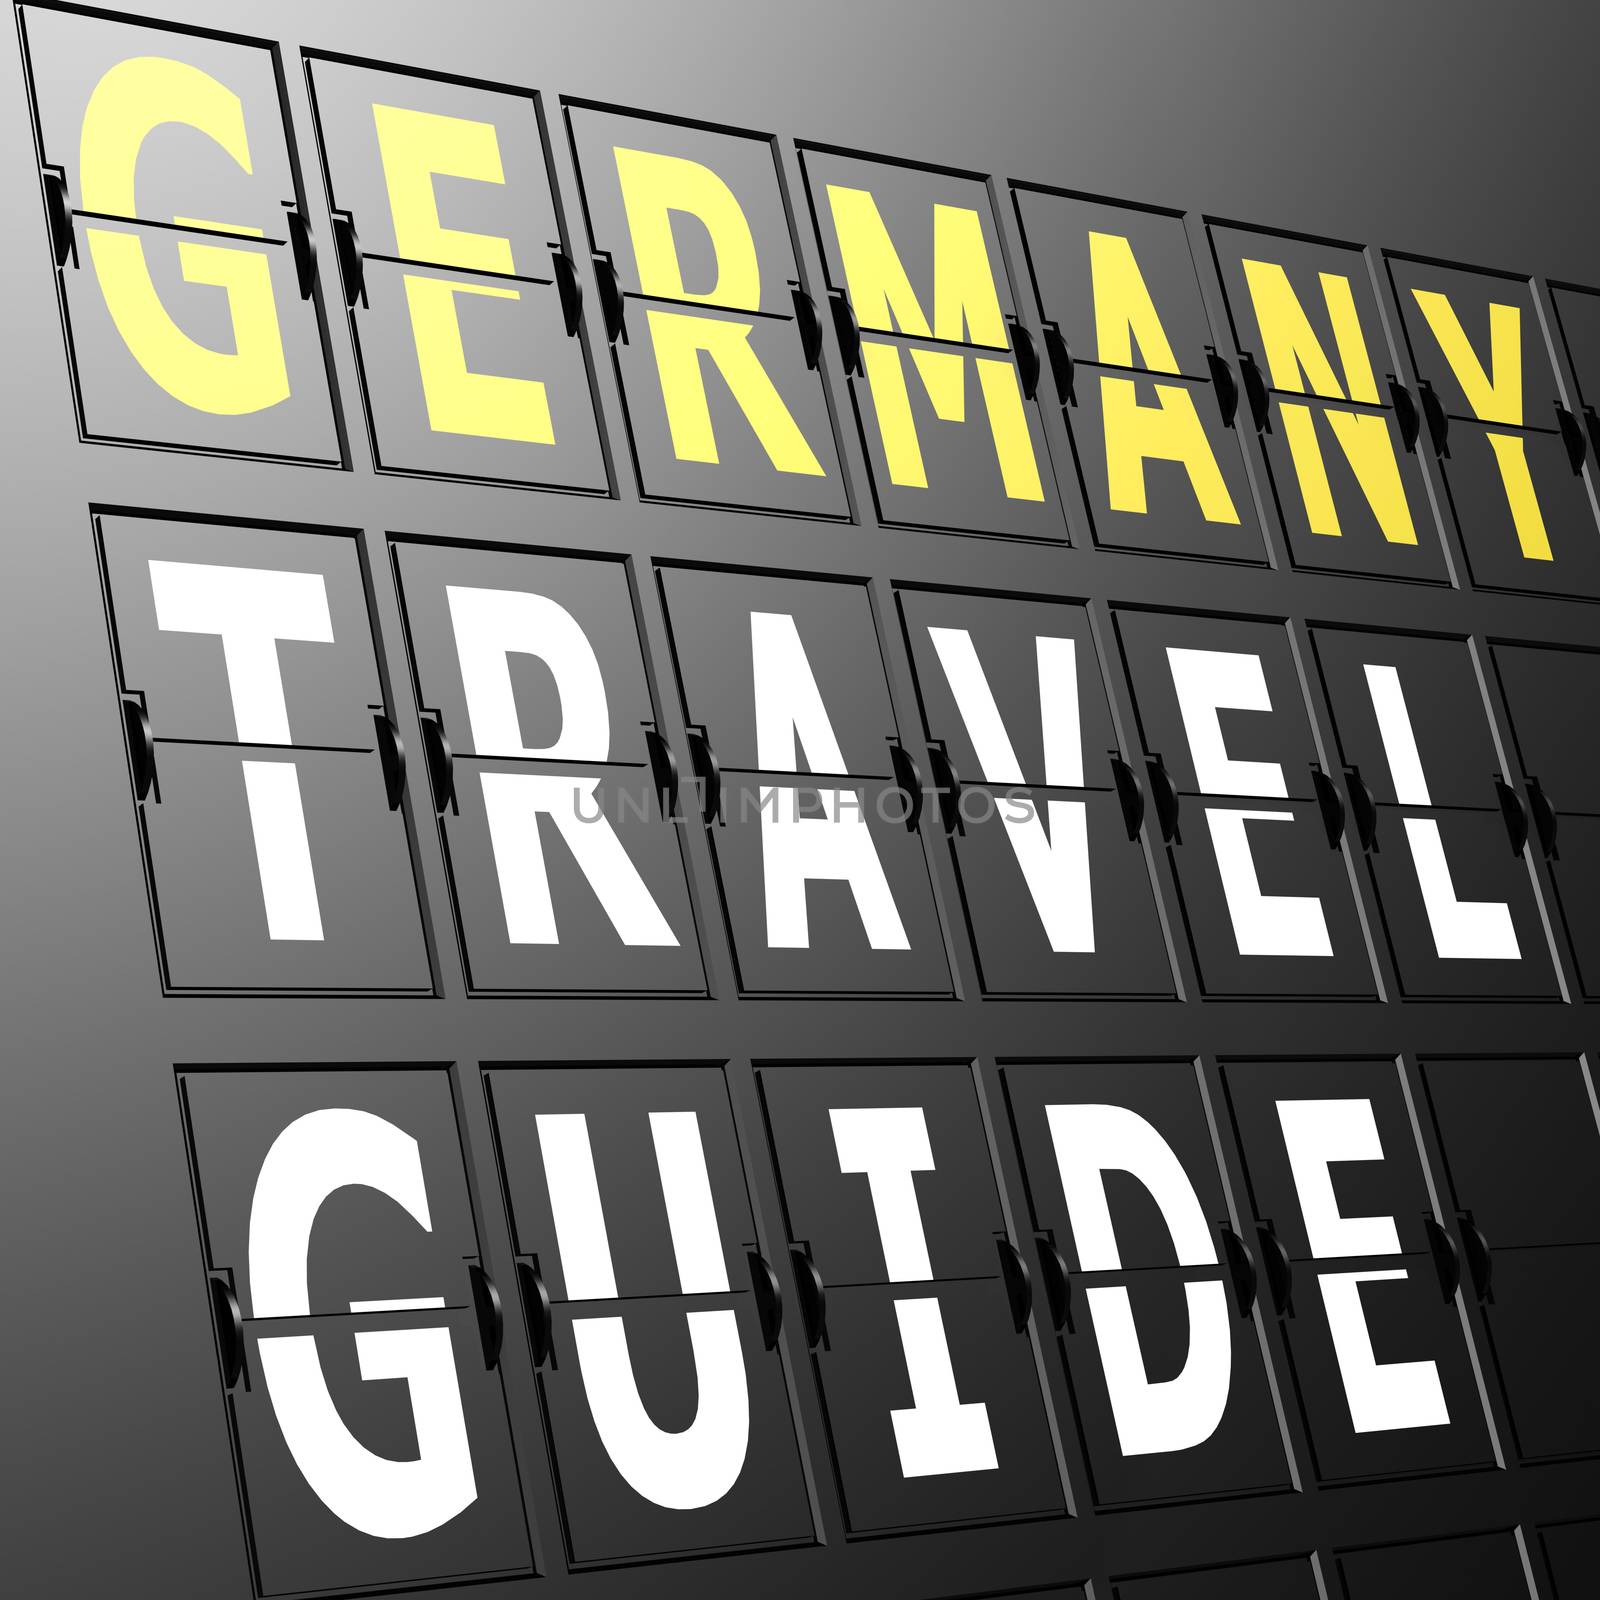 Airport display Germany travel guide by tang90246